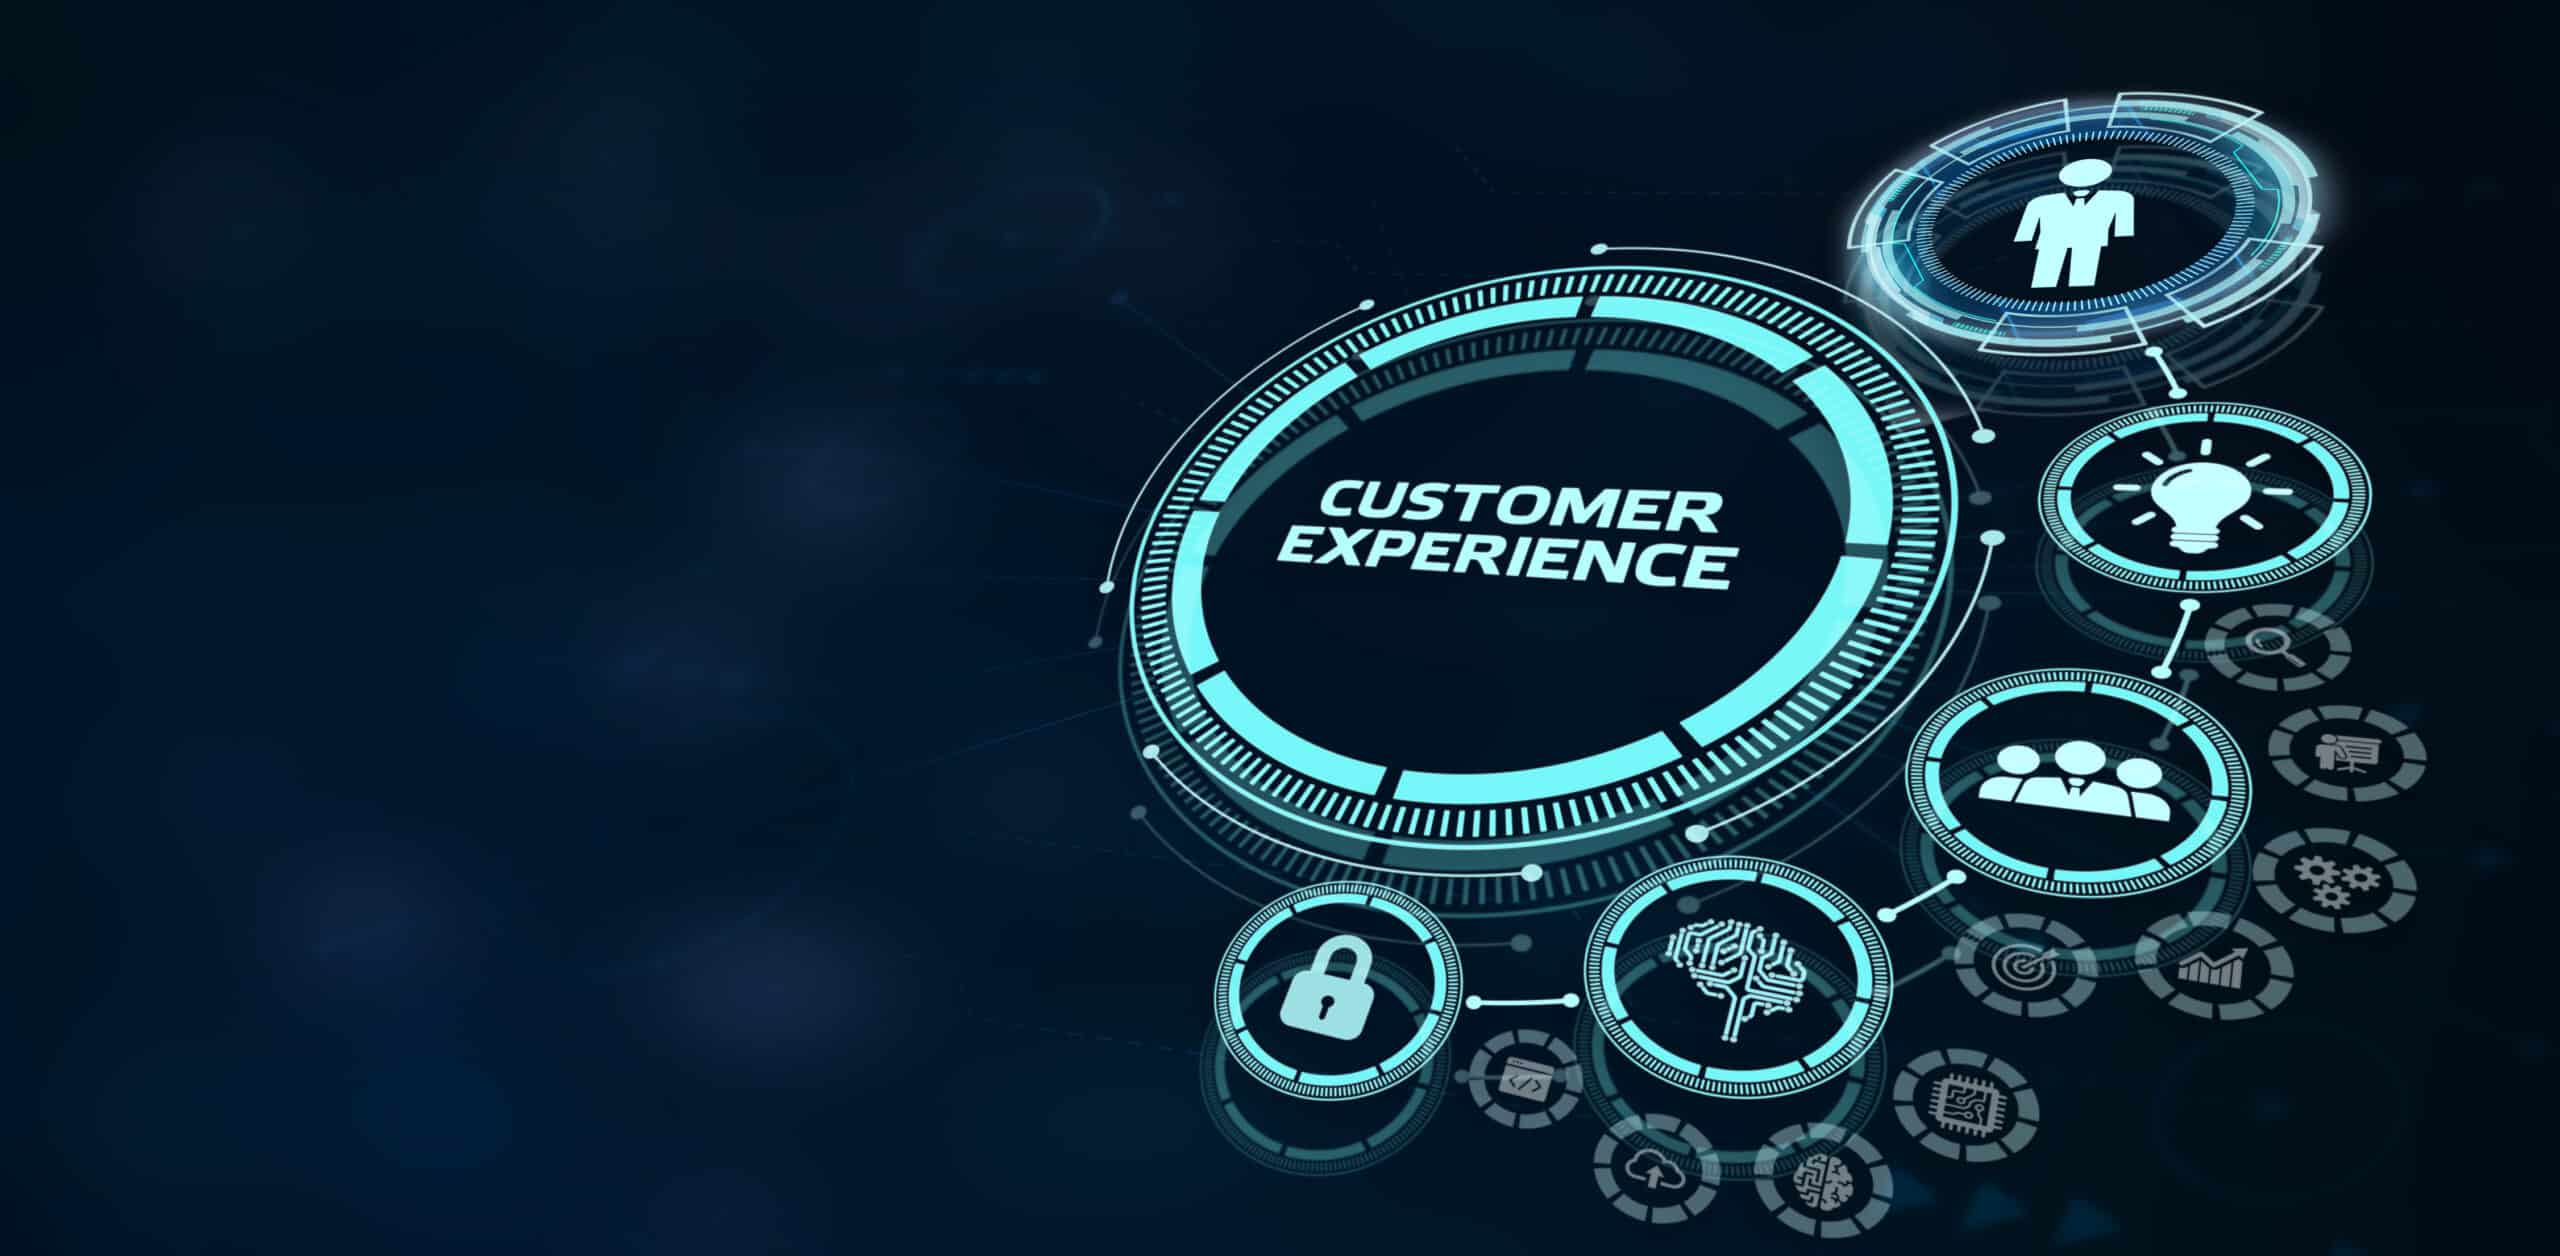 deliver enhanced and personalized customer experiences